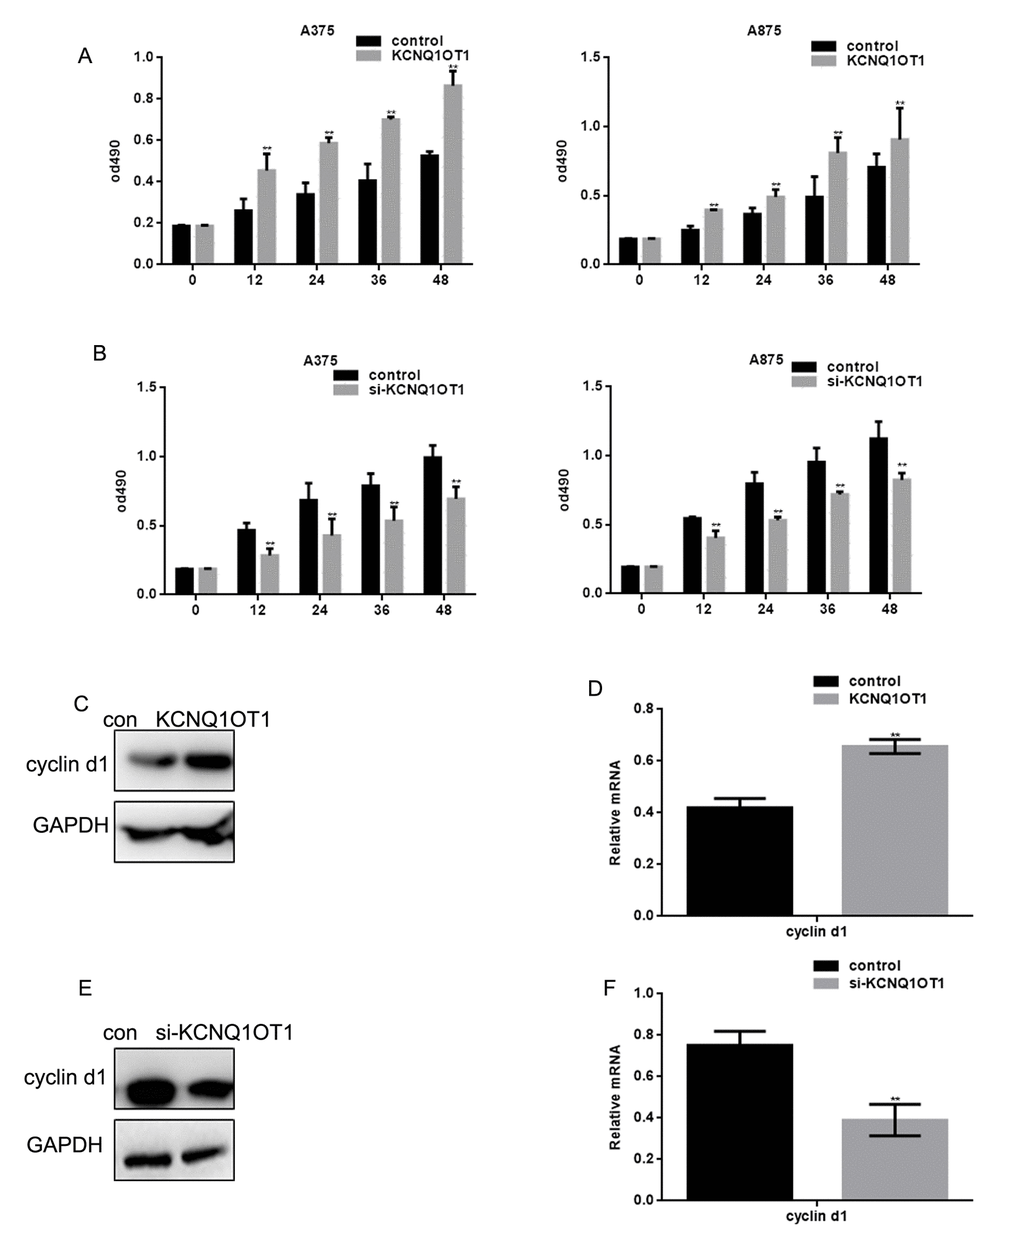 KCNQ1OT1 promotes melanoma cell proliferation. (A) After transfecting cells with KCNQ1OT1, proliferation rates of A375 and A875 were determined using MTT assays. Data are presented as means ± SEM. (B) After transfecting cells with si-KCNQ1OT1, the proliferation rates of A375 and A875 were determined using MTT assays. Data are presented as means ± SEM. (C, D) After transfecting KCNQ1OT1/control in A375 cells, the cyclin d1 protein and mRNA level was detected by western blot and real time PCR. Data are shown as mean ± SEM. ** PE, F) After transfecting si-KCNQ1OT1 or control in A375 cells, cyclin d1 protein and mRNA level was detected by western blot and real time PCR. Data are shown as mean ± SEM. ** P